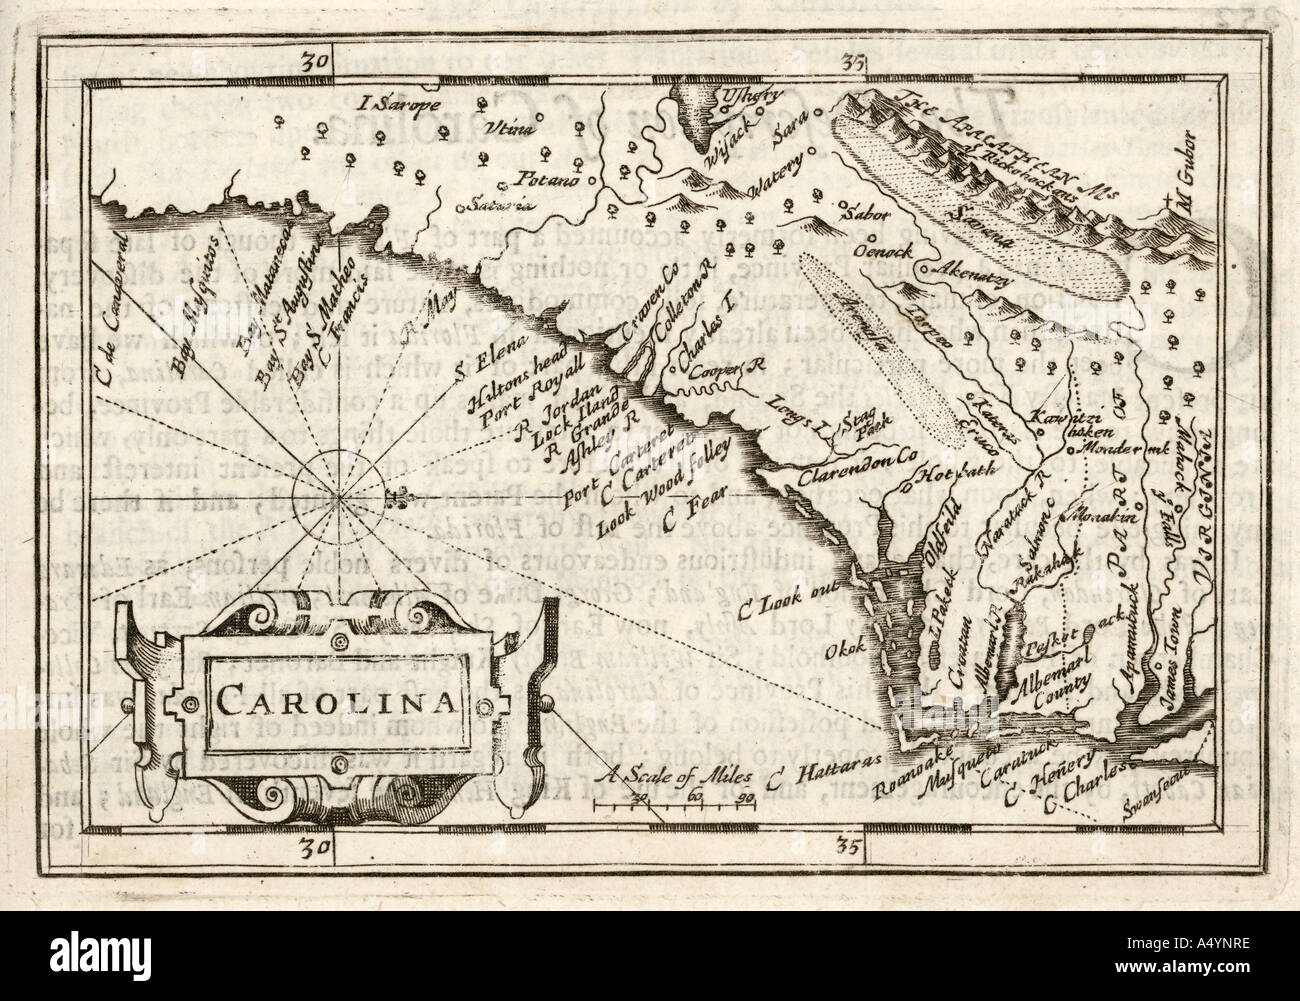 Antique map of Carolina by Petrus Kaerius 1646 from John Speed Prospect of the most Famous Parts of the World 1675 JMH0975 Stock Photo